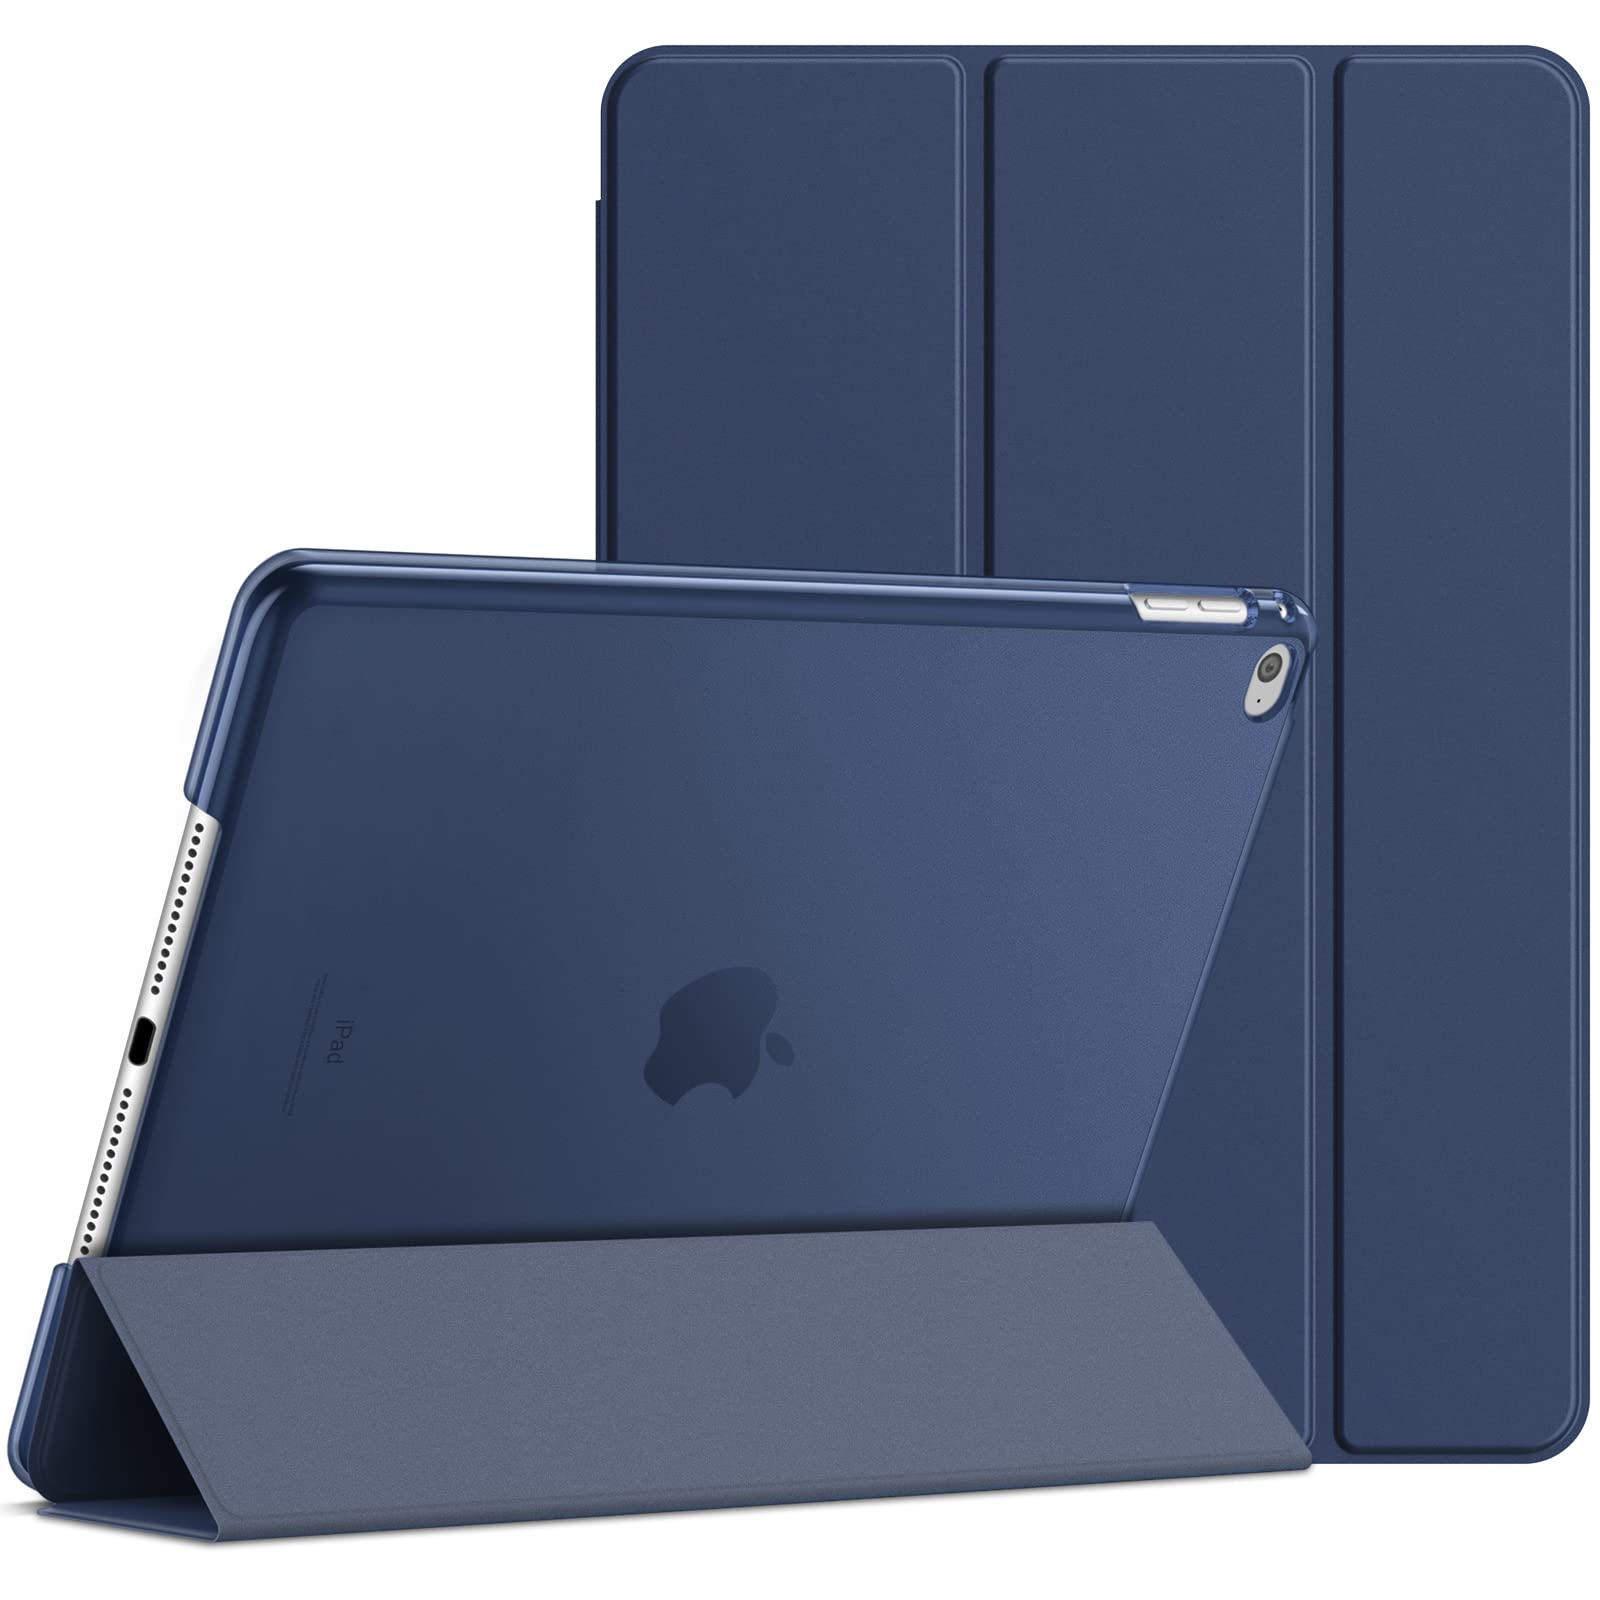 JETech case for iPad Air 2 (2nd generation), Smart cover Auto WakeSleep (Navy)